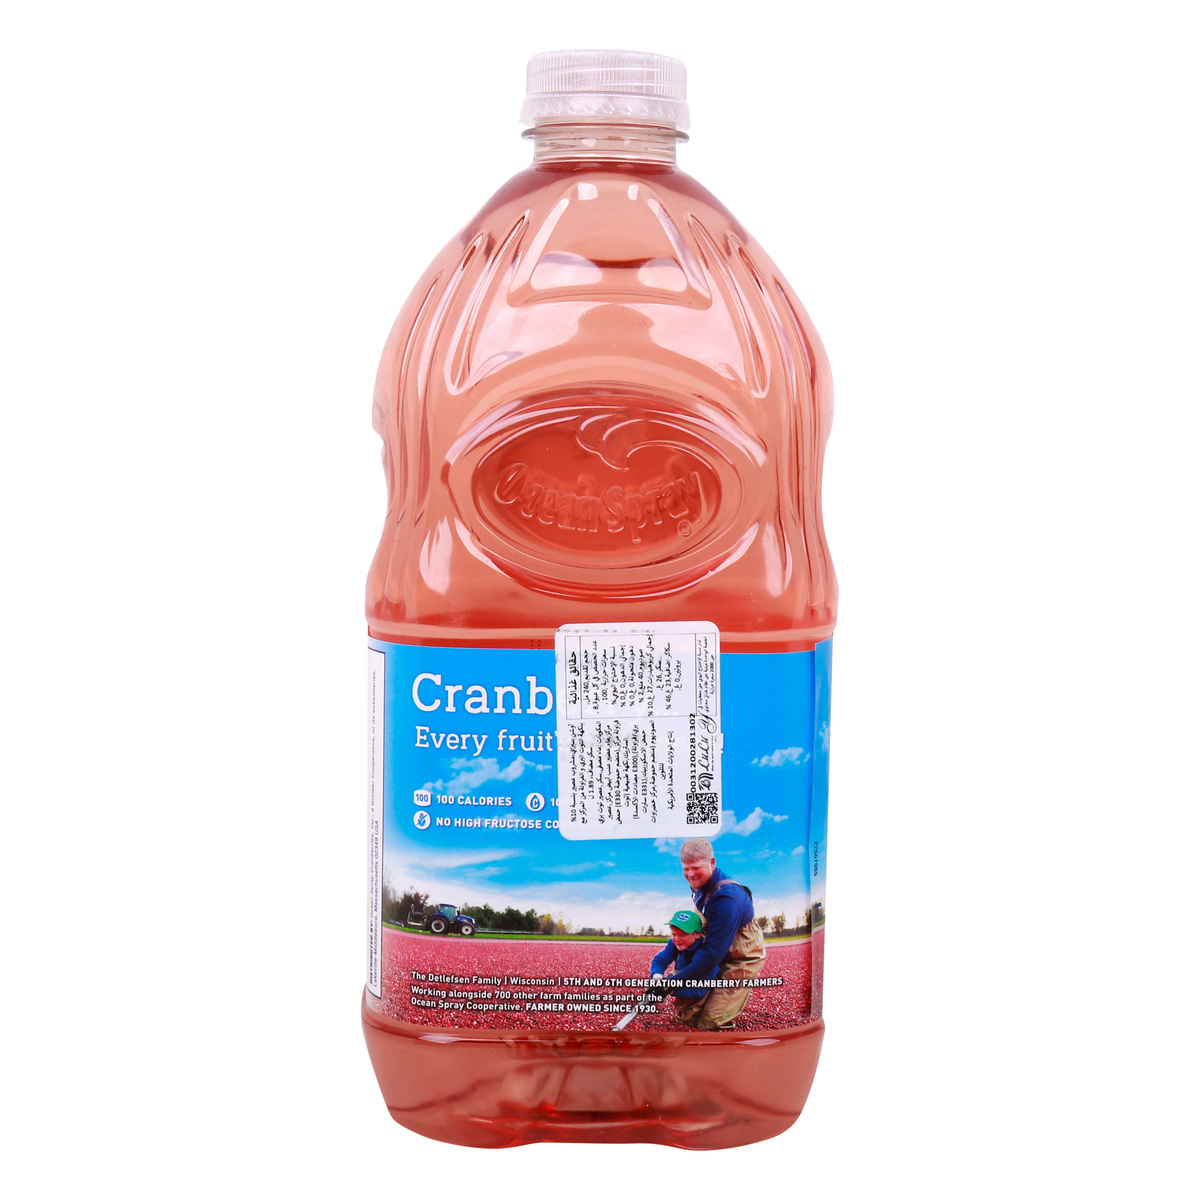 Ocean Spray White Cranberry Strawberry Drink 1.89 Litres